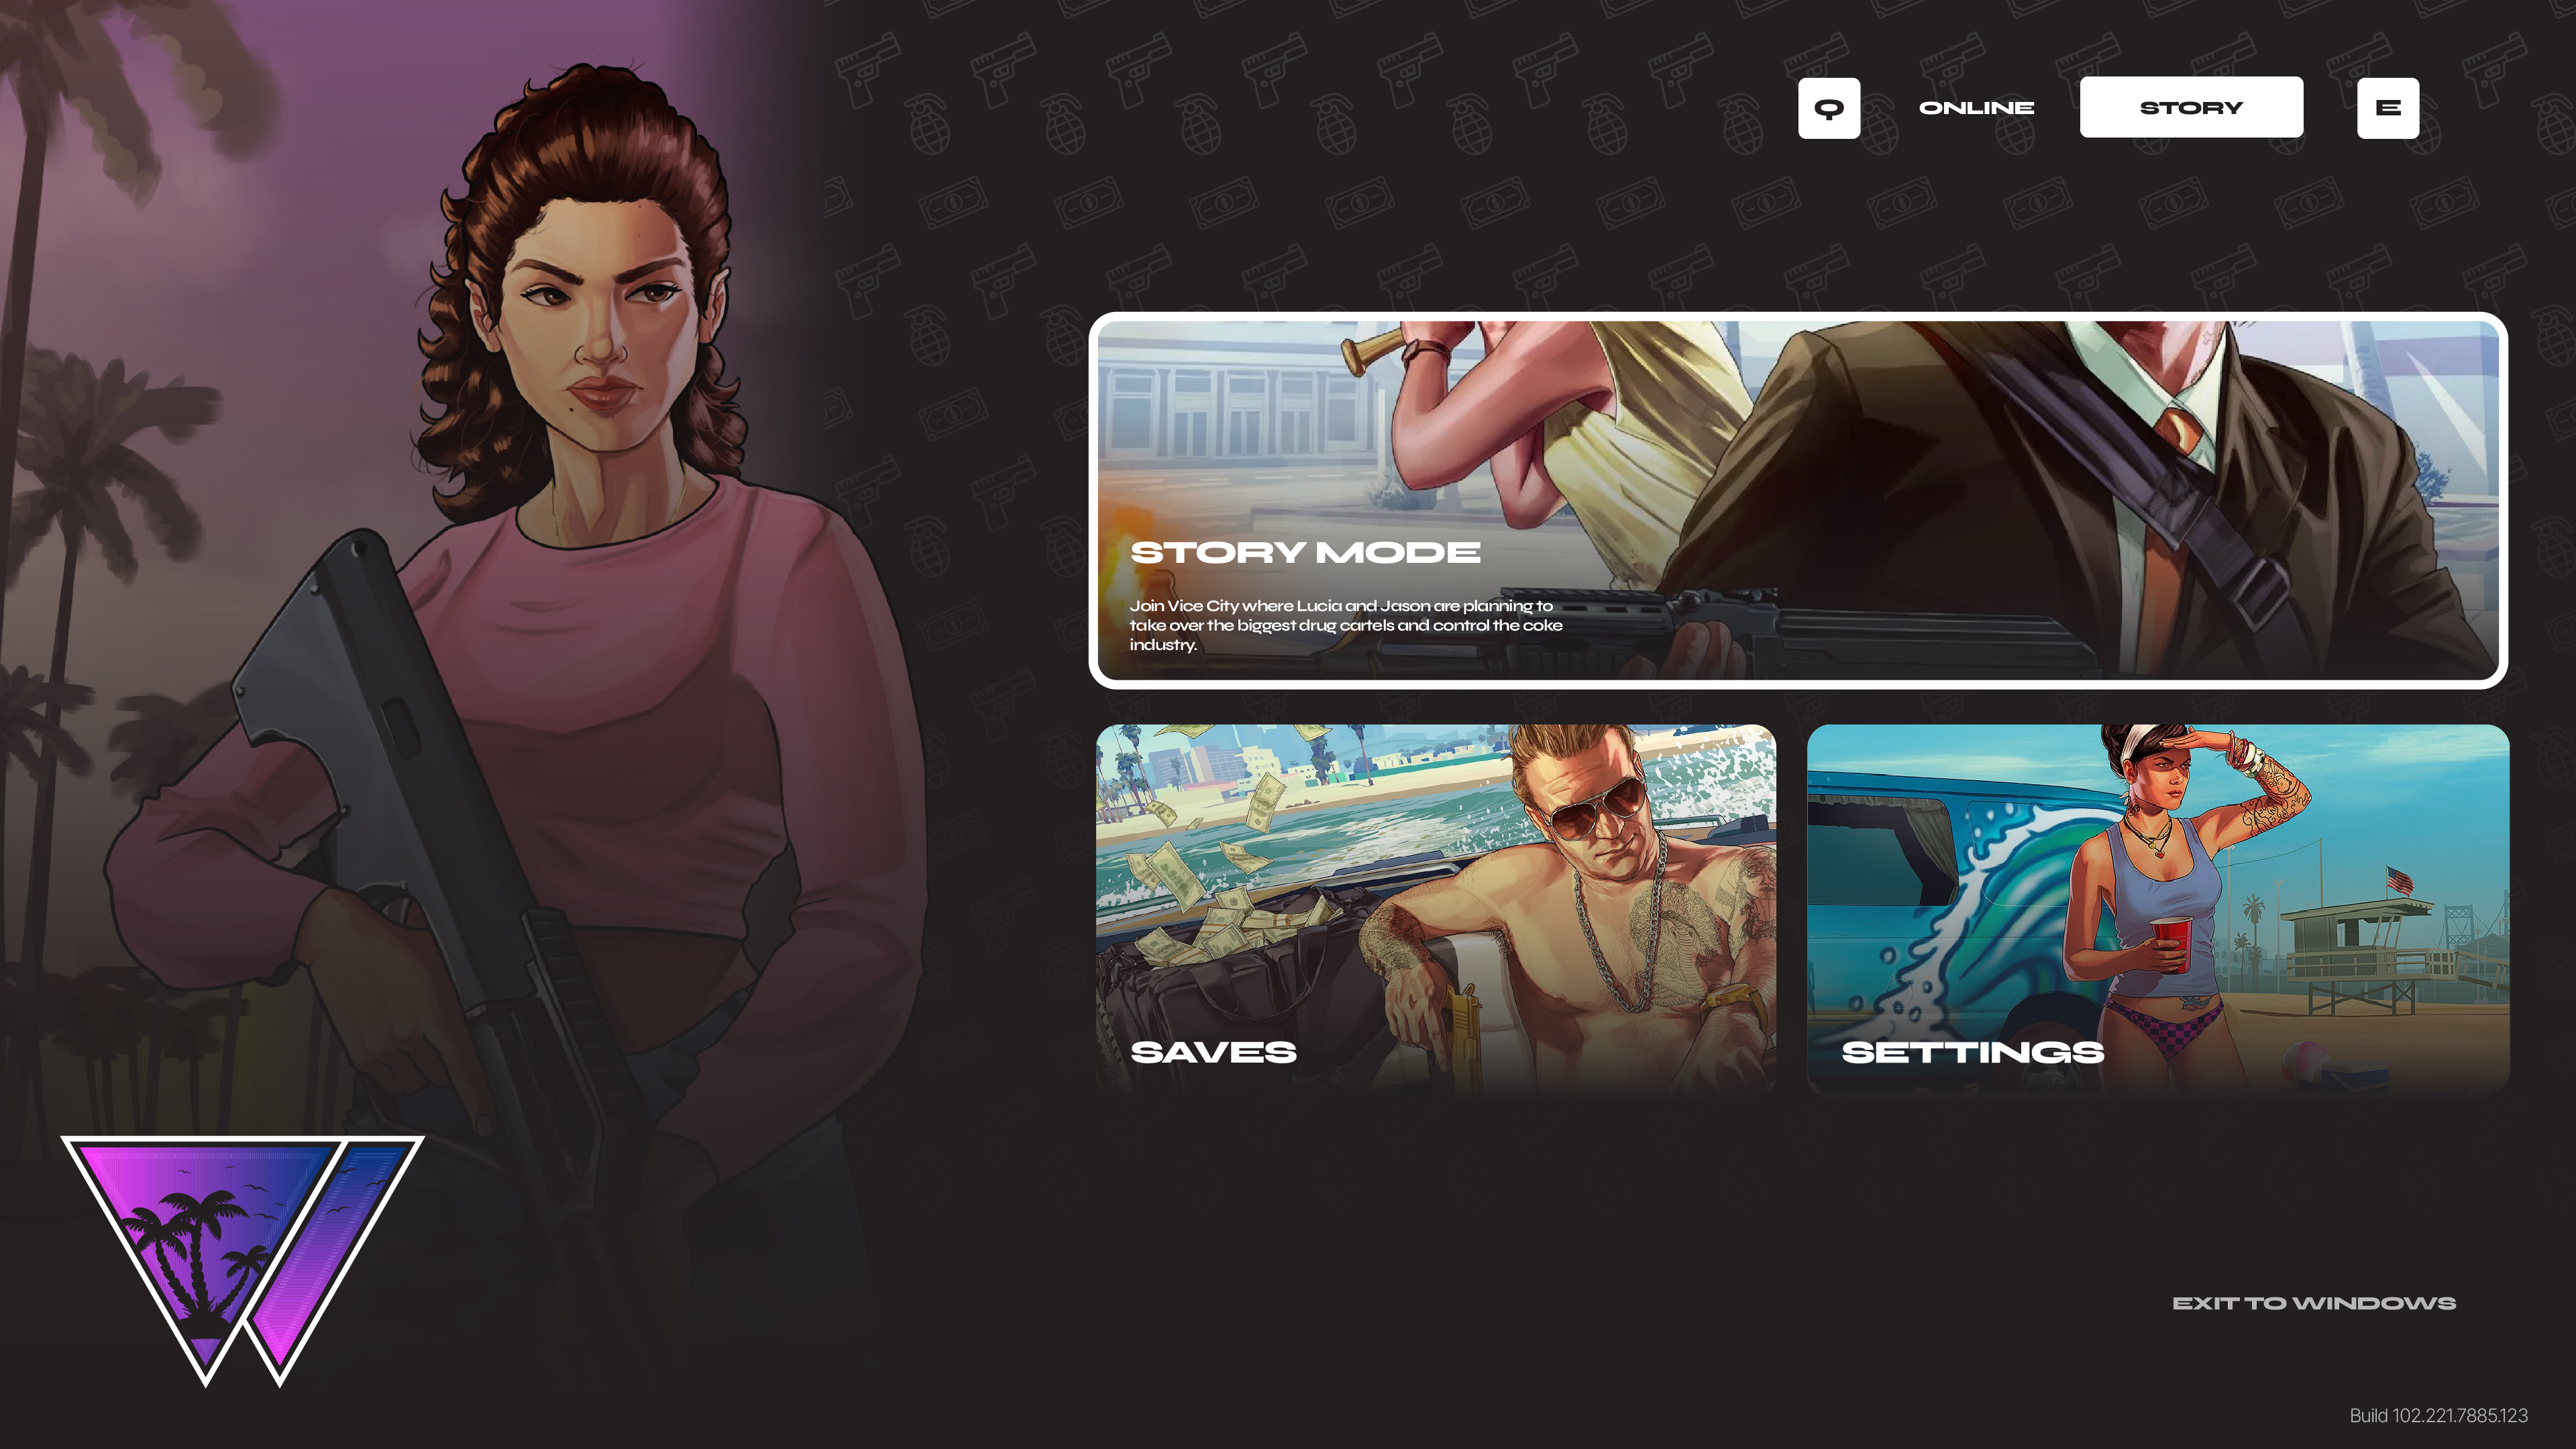 GTA VI UI & Start Menu Concept based on the recent leaks (made by